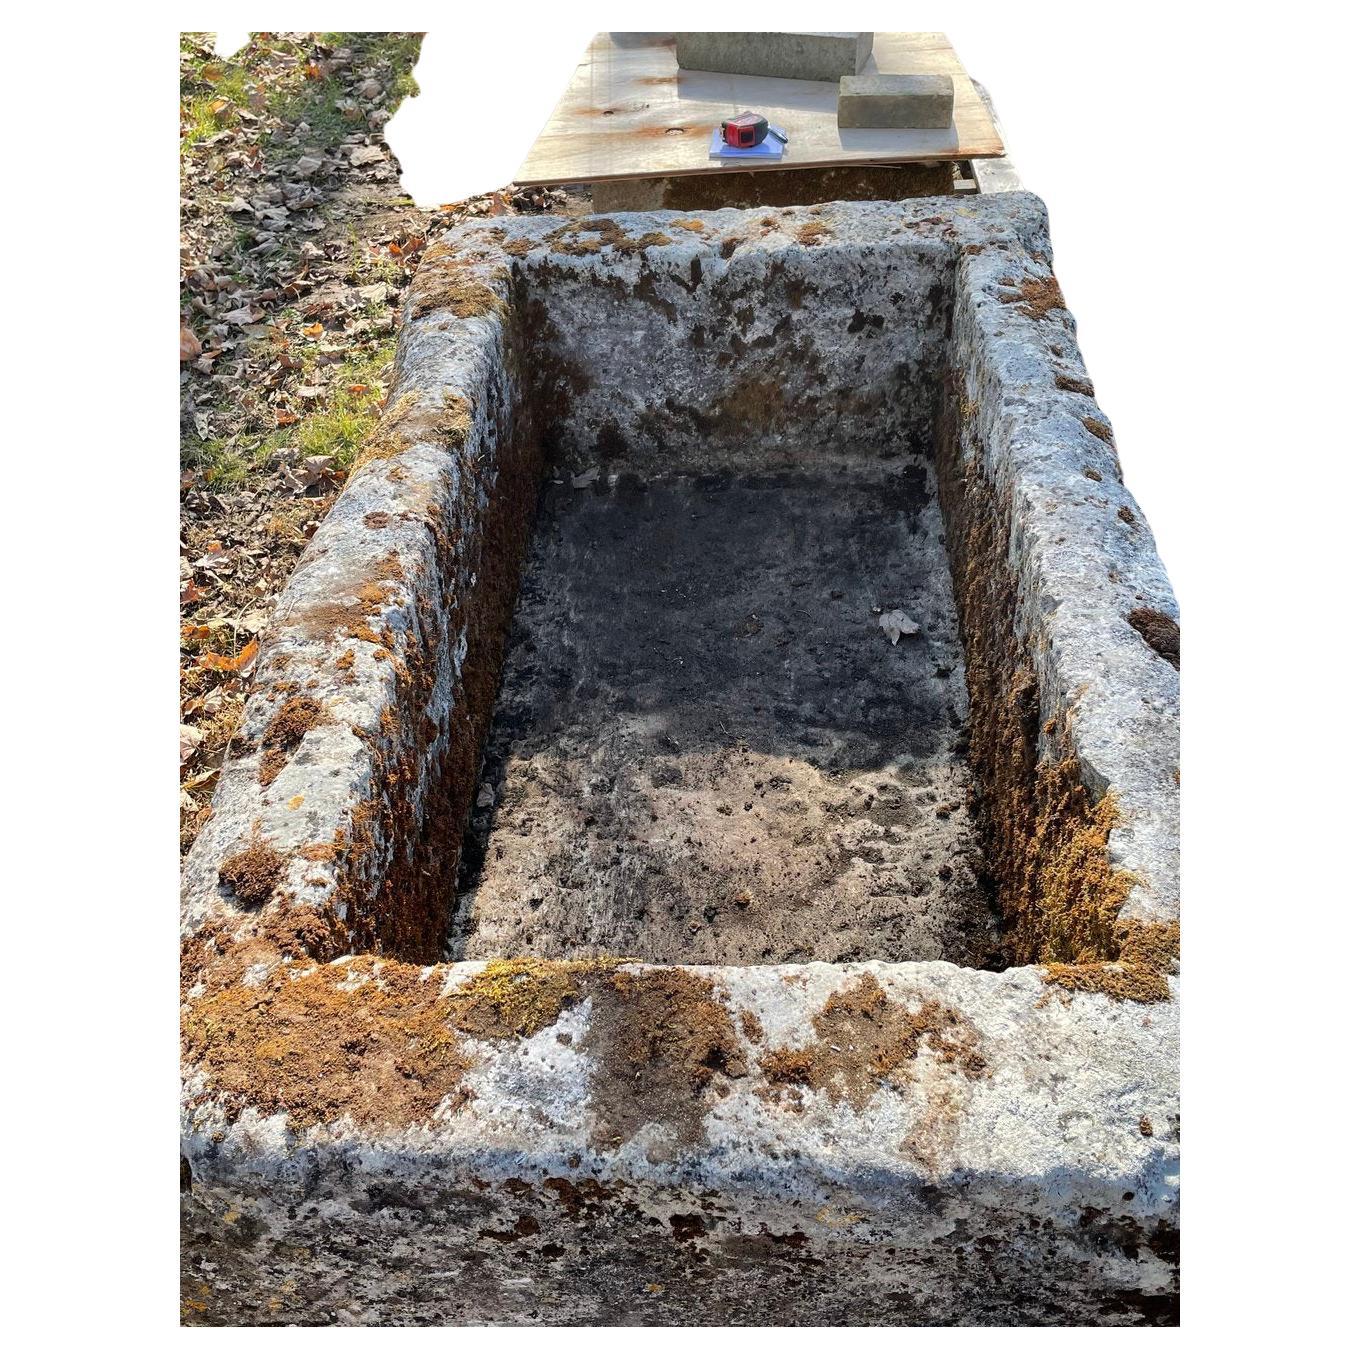 Troughs of this size, age and in excellent condition with fabulous patinas are getting harder and harder to source. We choose our French limestone troughs for their beautiful patinas and versatility as water features or planters. This beauty was